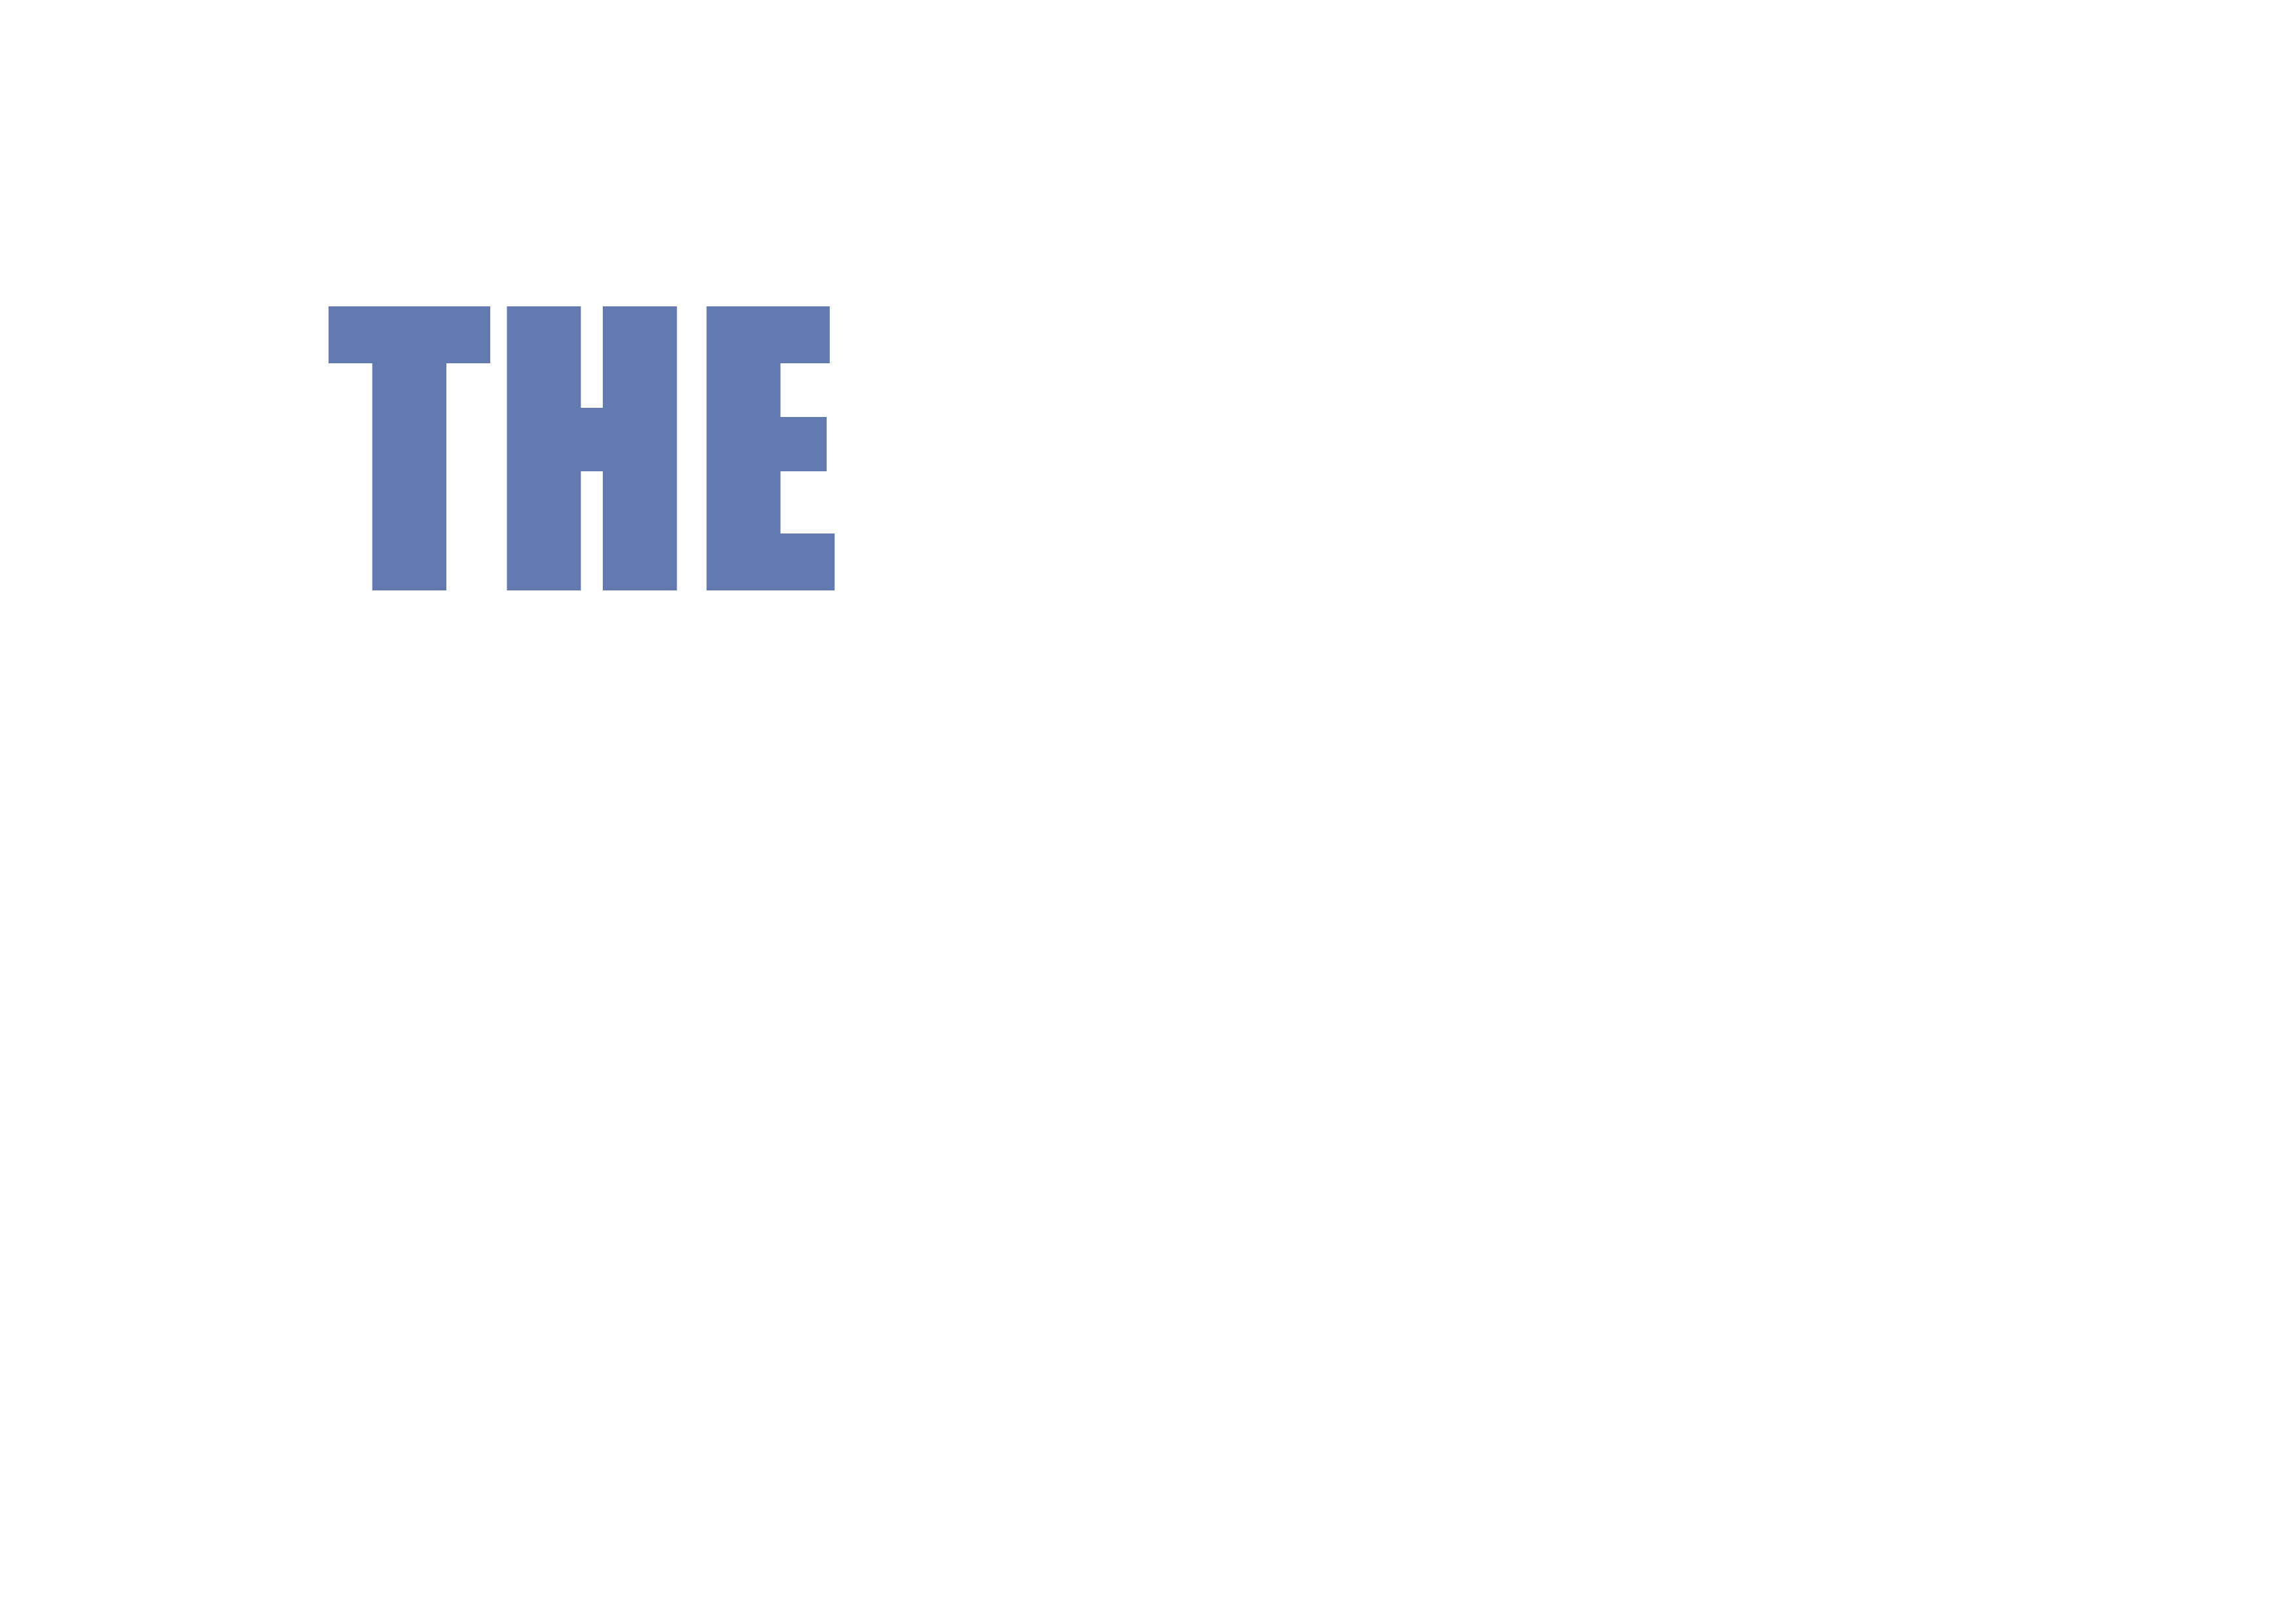 The Business Show Asia 2024